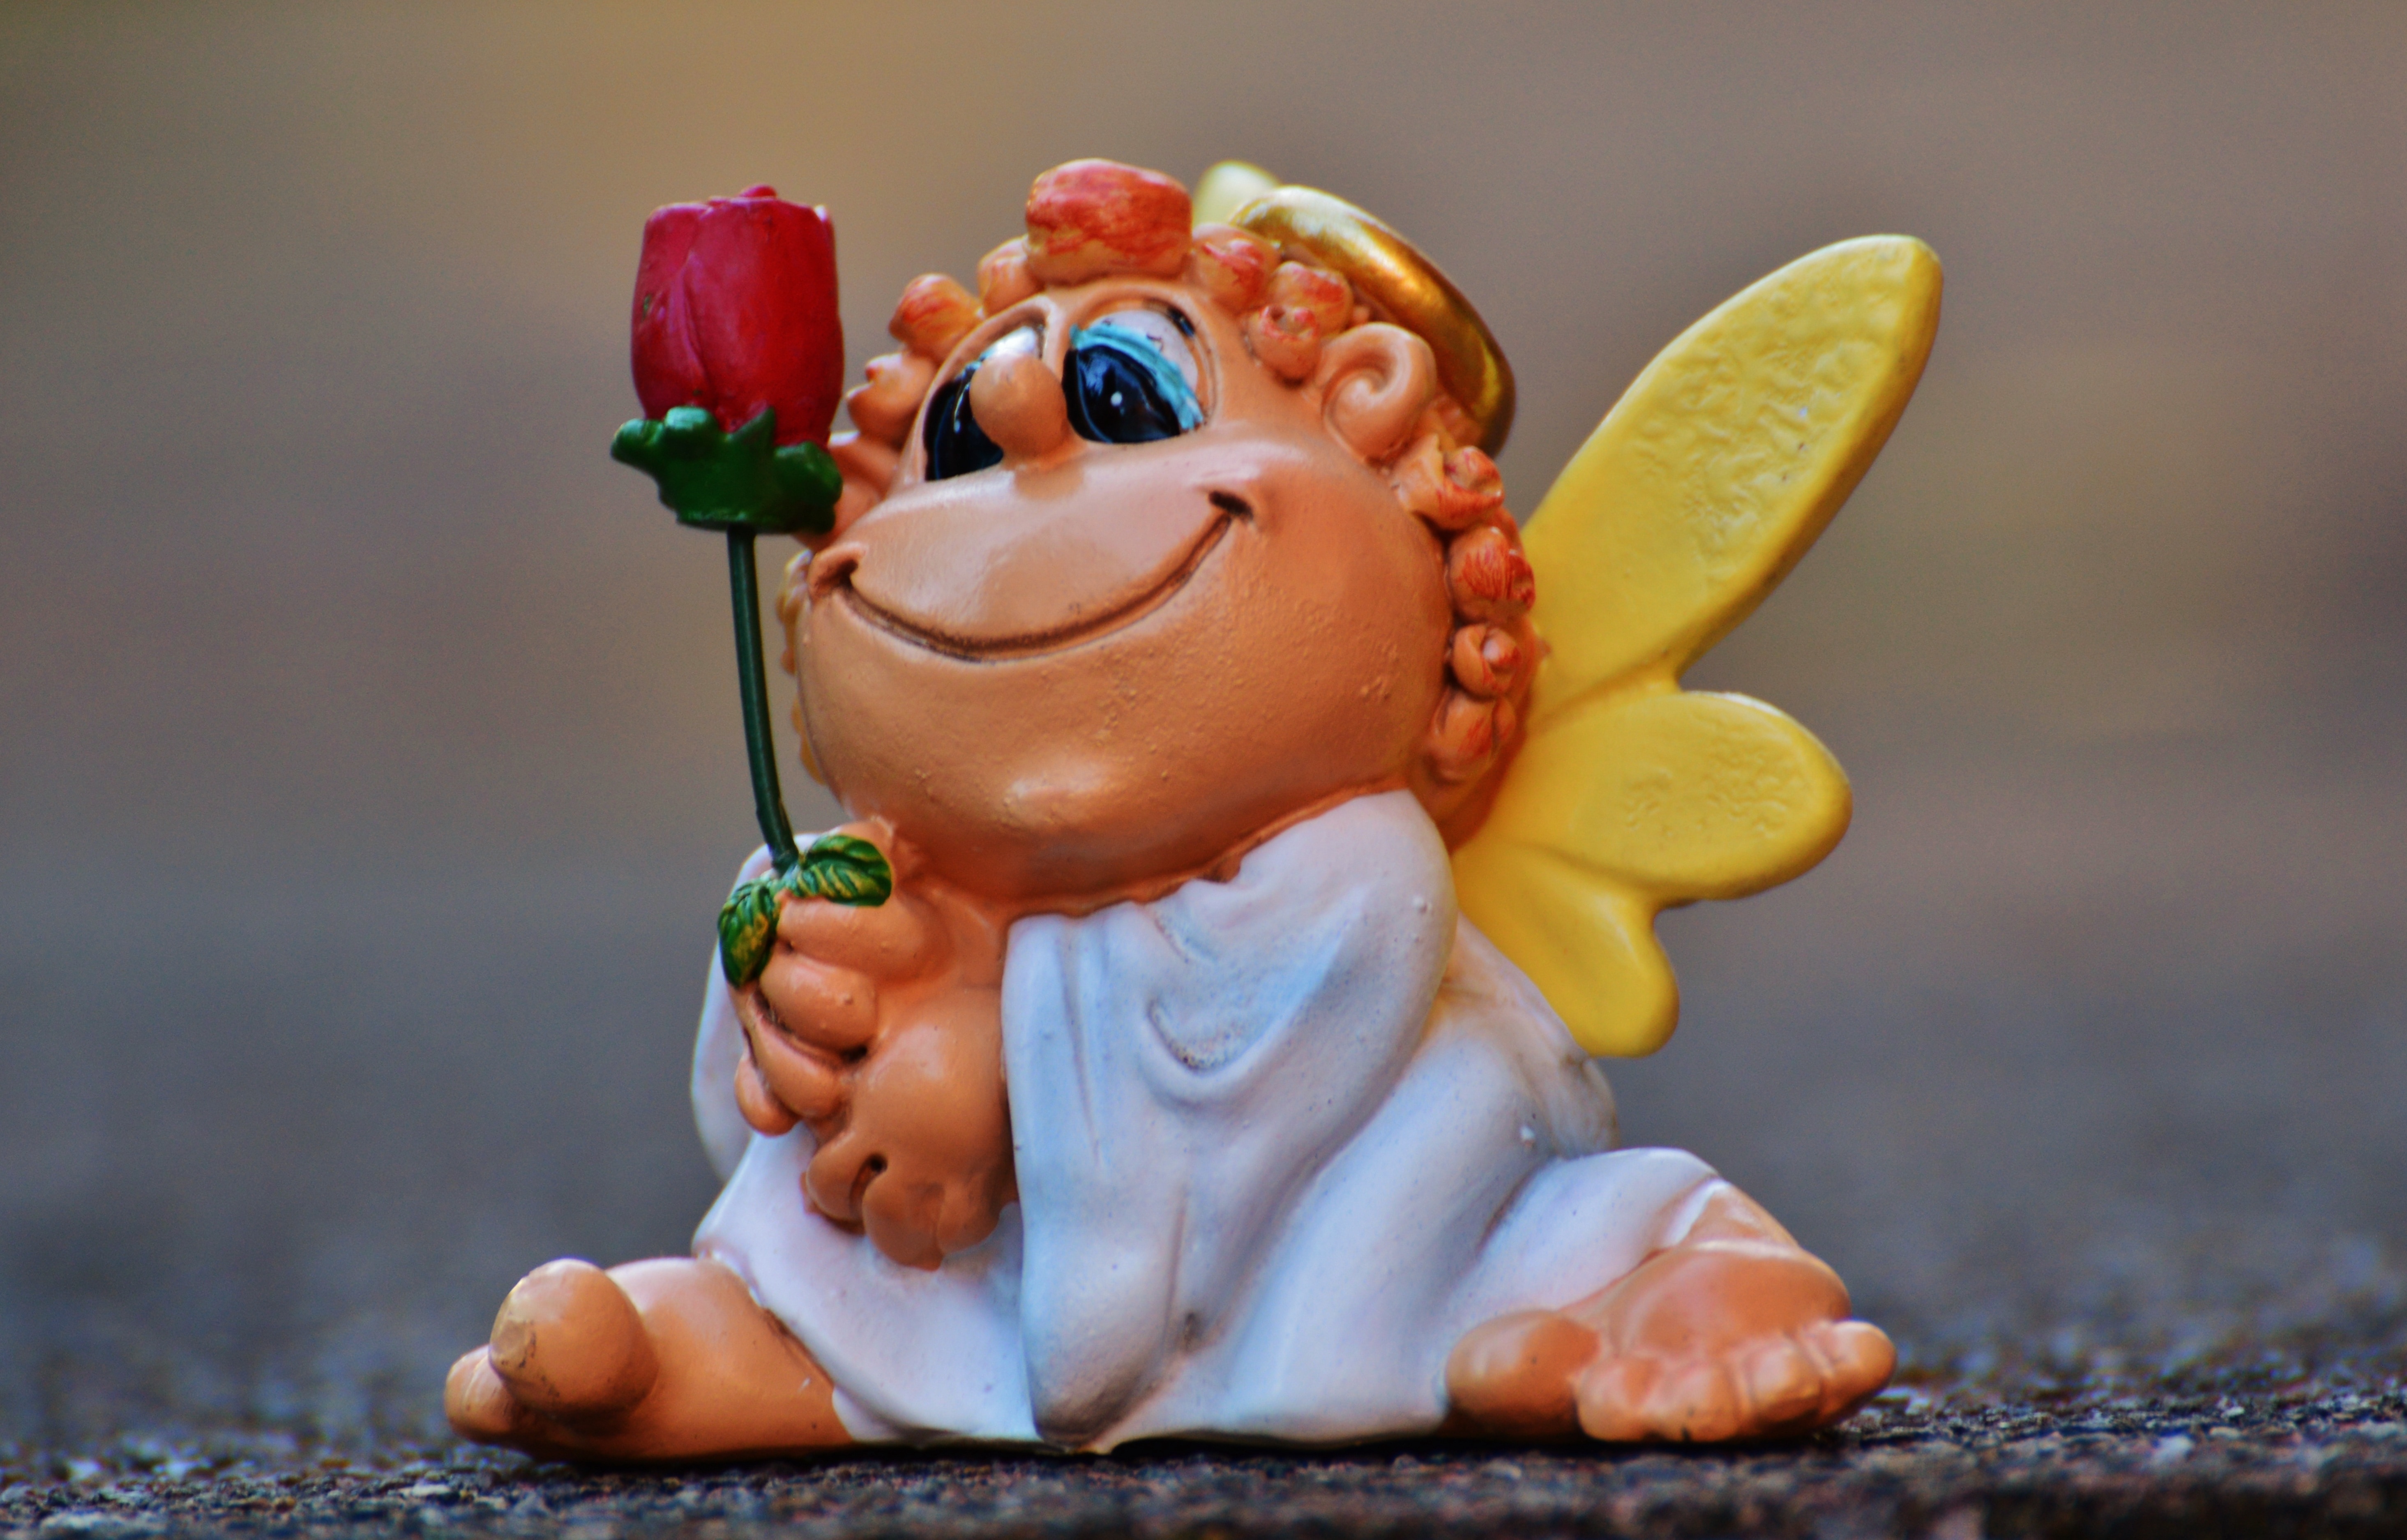 brown haired angel holding rose ceramic figurine